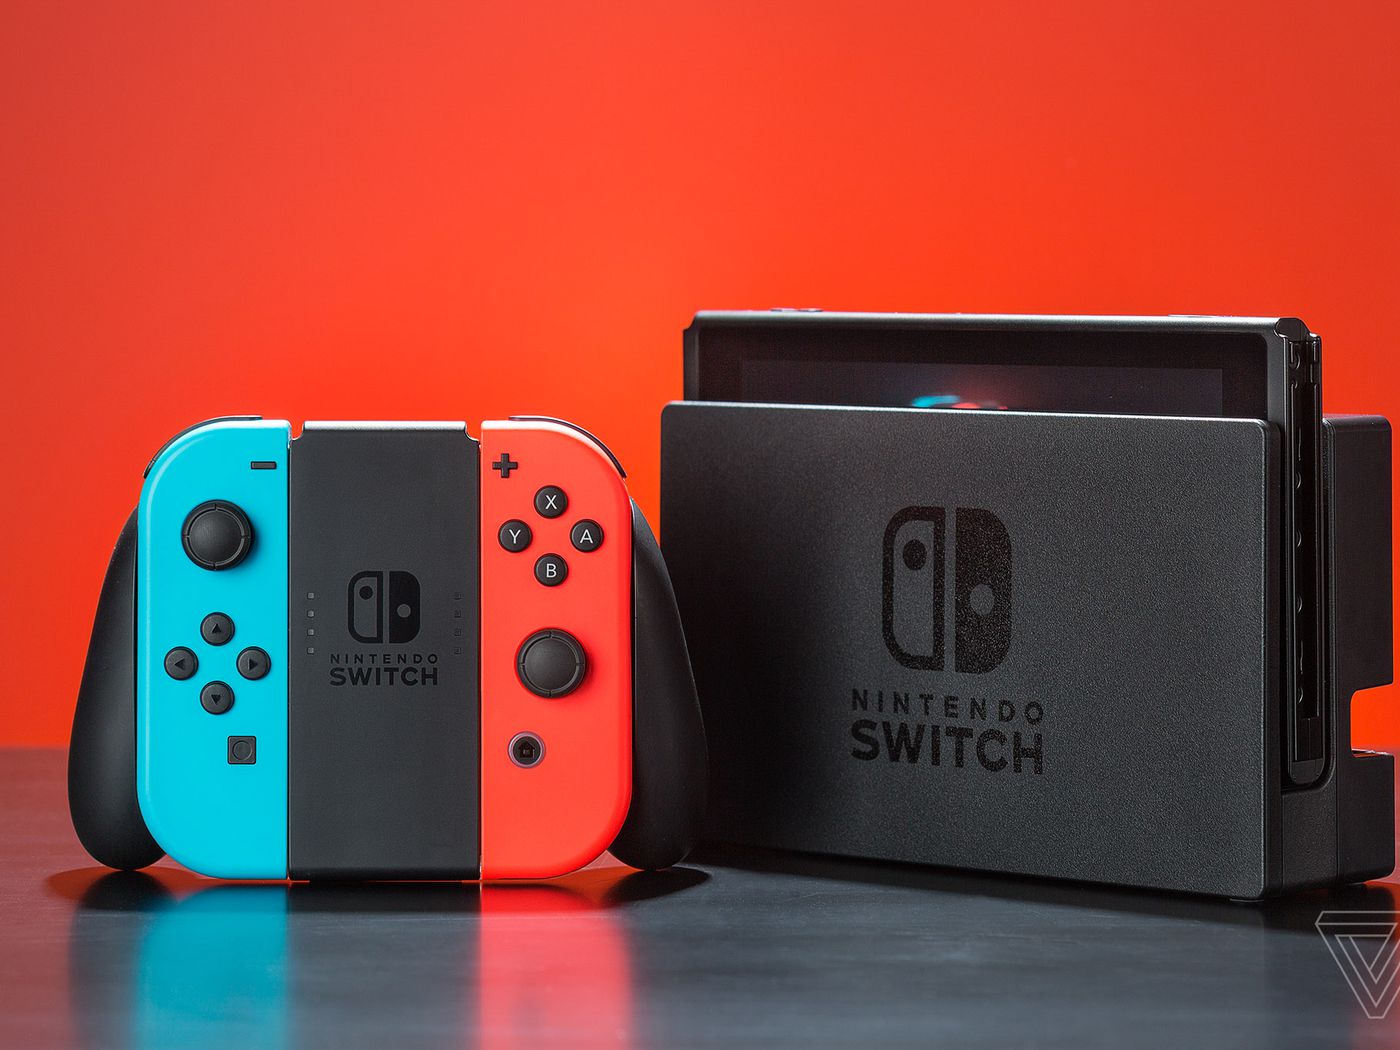 How To Make Sure You Re Buying The New Nintendo Switch With Improved Battery Life The Verge